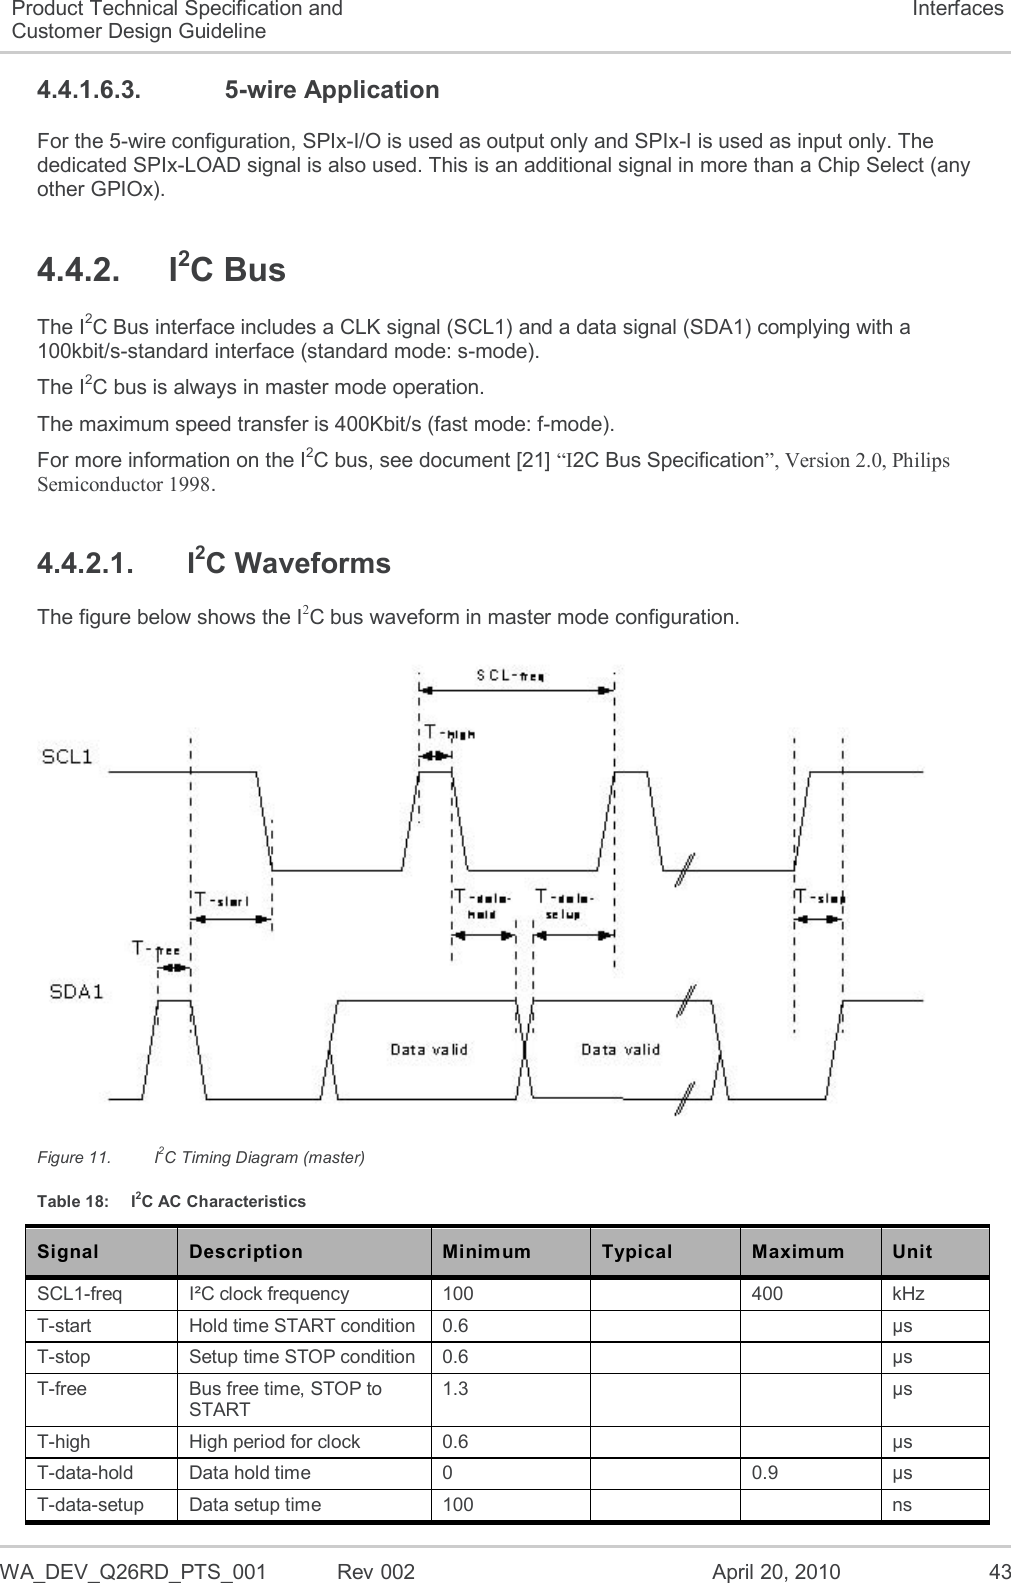  WA_DEV_Q26RD_PTS_001  Rev 002  April 20, 2010 43 Product Technical Specification and Customer Design Guideline Interfaces 4.4.1.6.3.  5-wire Application For the 5-wire configuration, SPIx-I/O is used as output only and SPIx-I is used as input only. The dedicated SPIx-LOAD signal is also used. This is an additional signal in more than a Chip Select (any other GPIOx). 4.4.2.  I2C Bus The I2C Bus interface includes a CLK signal (SCL1) and a data signal (SDA1) complying with a 100kbit/s-standard interface (standard mode: s-mode). The I2C bus is always in master mode operation. The maximum speed transfer is 400Kbit/s (fast mode: f-mode). For more information on the I2C bus, see document [21] “I2C Bus Specification”, Version 2.0, Philips Semiconductor 1998. 4.4.2.1.  I2C Waveforms The figure below shows the I2C bus waveform in master mode configuration.  Figure 11.  I2C Timing Diagram (master) Table 18:  I2C AC Characteristics Signal Description Minimum Typical Maximum Unit SCL1-freq I²C clock frequency  100  400 kHz T-start Hold time START condition 0.6   µs T-stop Setup time STOP condition 0.6   µs T-free Bus free time, STOP to START 1.3   µs T-high High period for clock 0.6   µs T-data-hold Data hold time 0  0.9 µs T-data-setup Data setup time 100   ns 